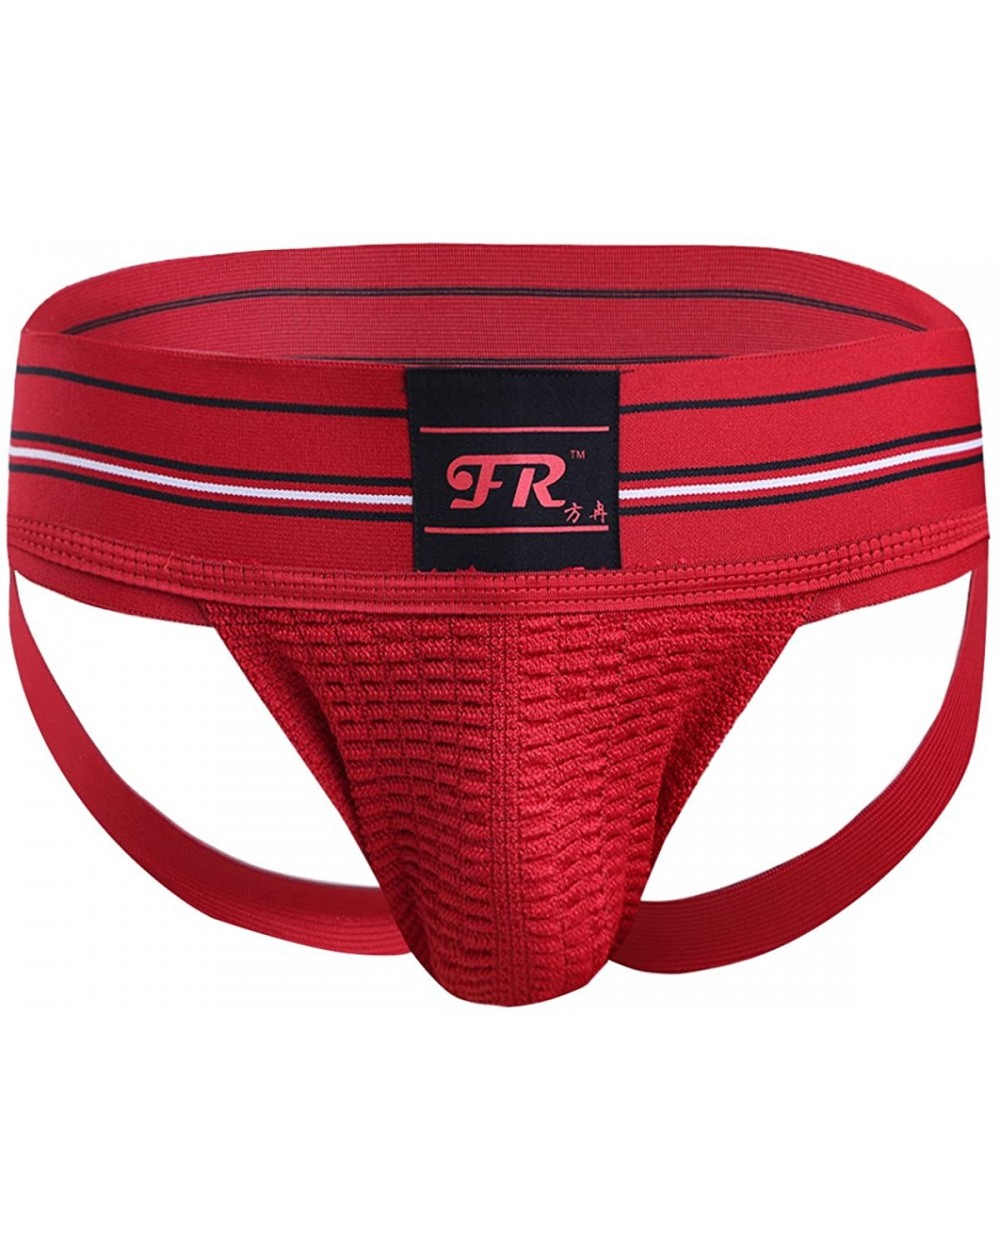 Men's Athletic Supporter Jockstrap Bulge Pouch Thong Underwear Open Butt Underpants - Red - C9197XCENDE $30.16 G-Strings & Th...